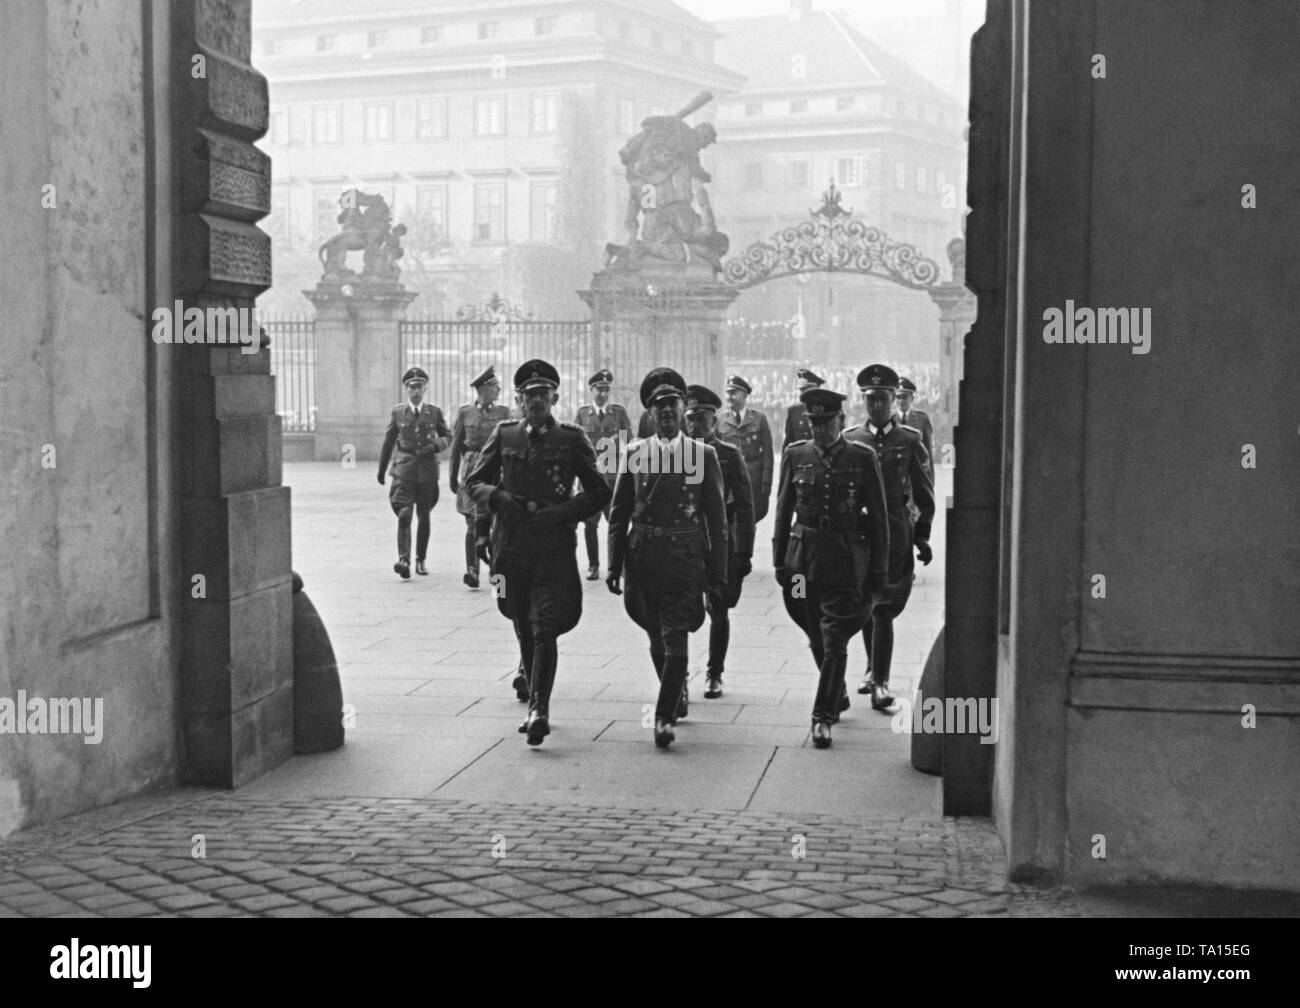 The State Secretary of the Protectorate of Bohemia and Moravia, Karl Hermann Frank, the new Reich Protector for Bohemia and Moravia, Wilhelm Frick and the General der Panzertruppe Ferdinand Schaal enter the Prague Castle. After the assassination of Reinhard Heydrich, Frick becomes the new Reich Protector in 1943. Stock Photo